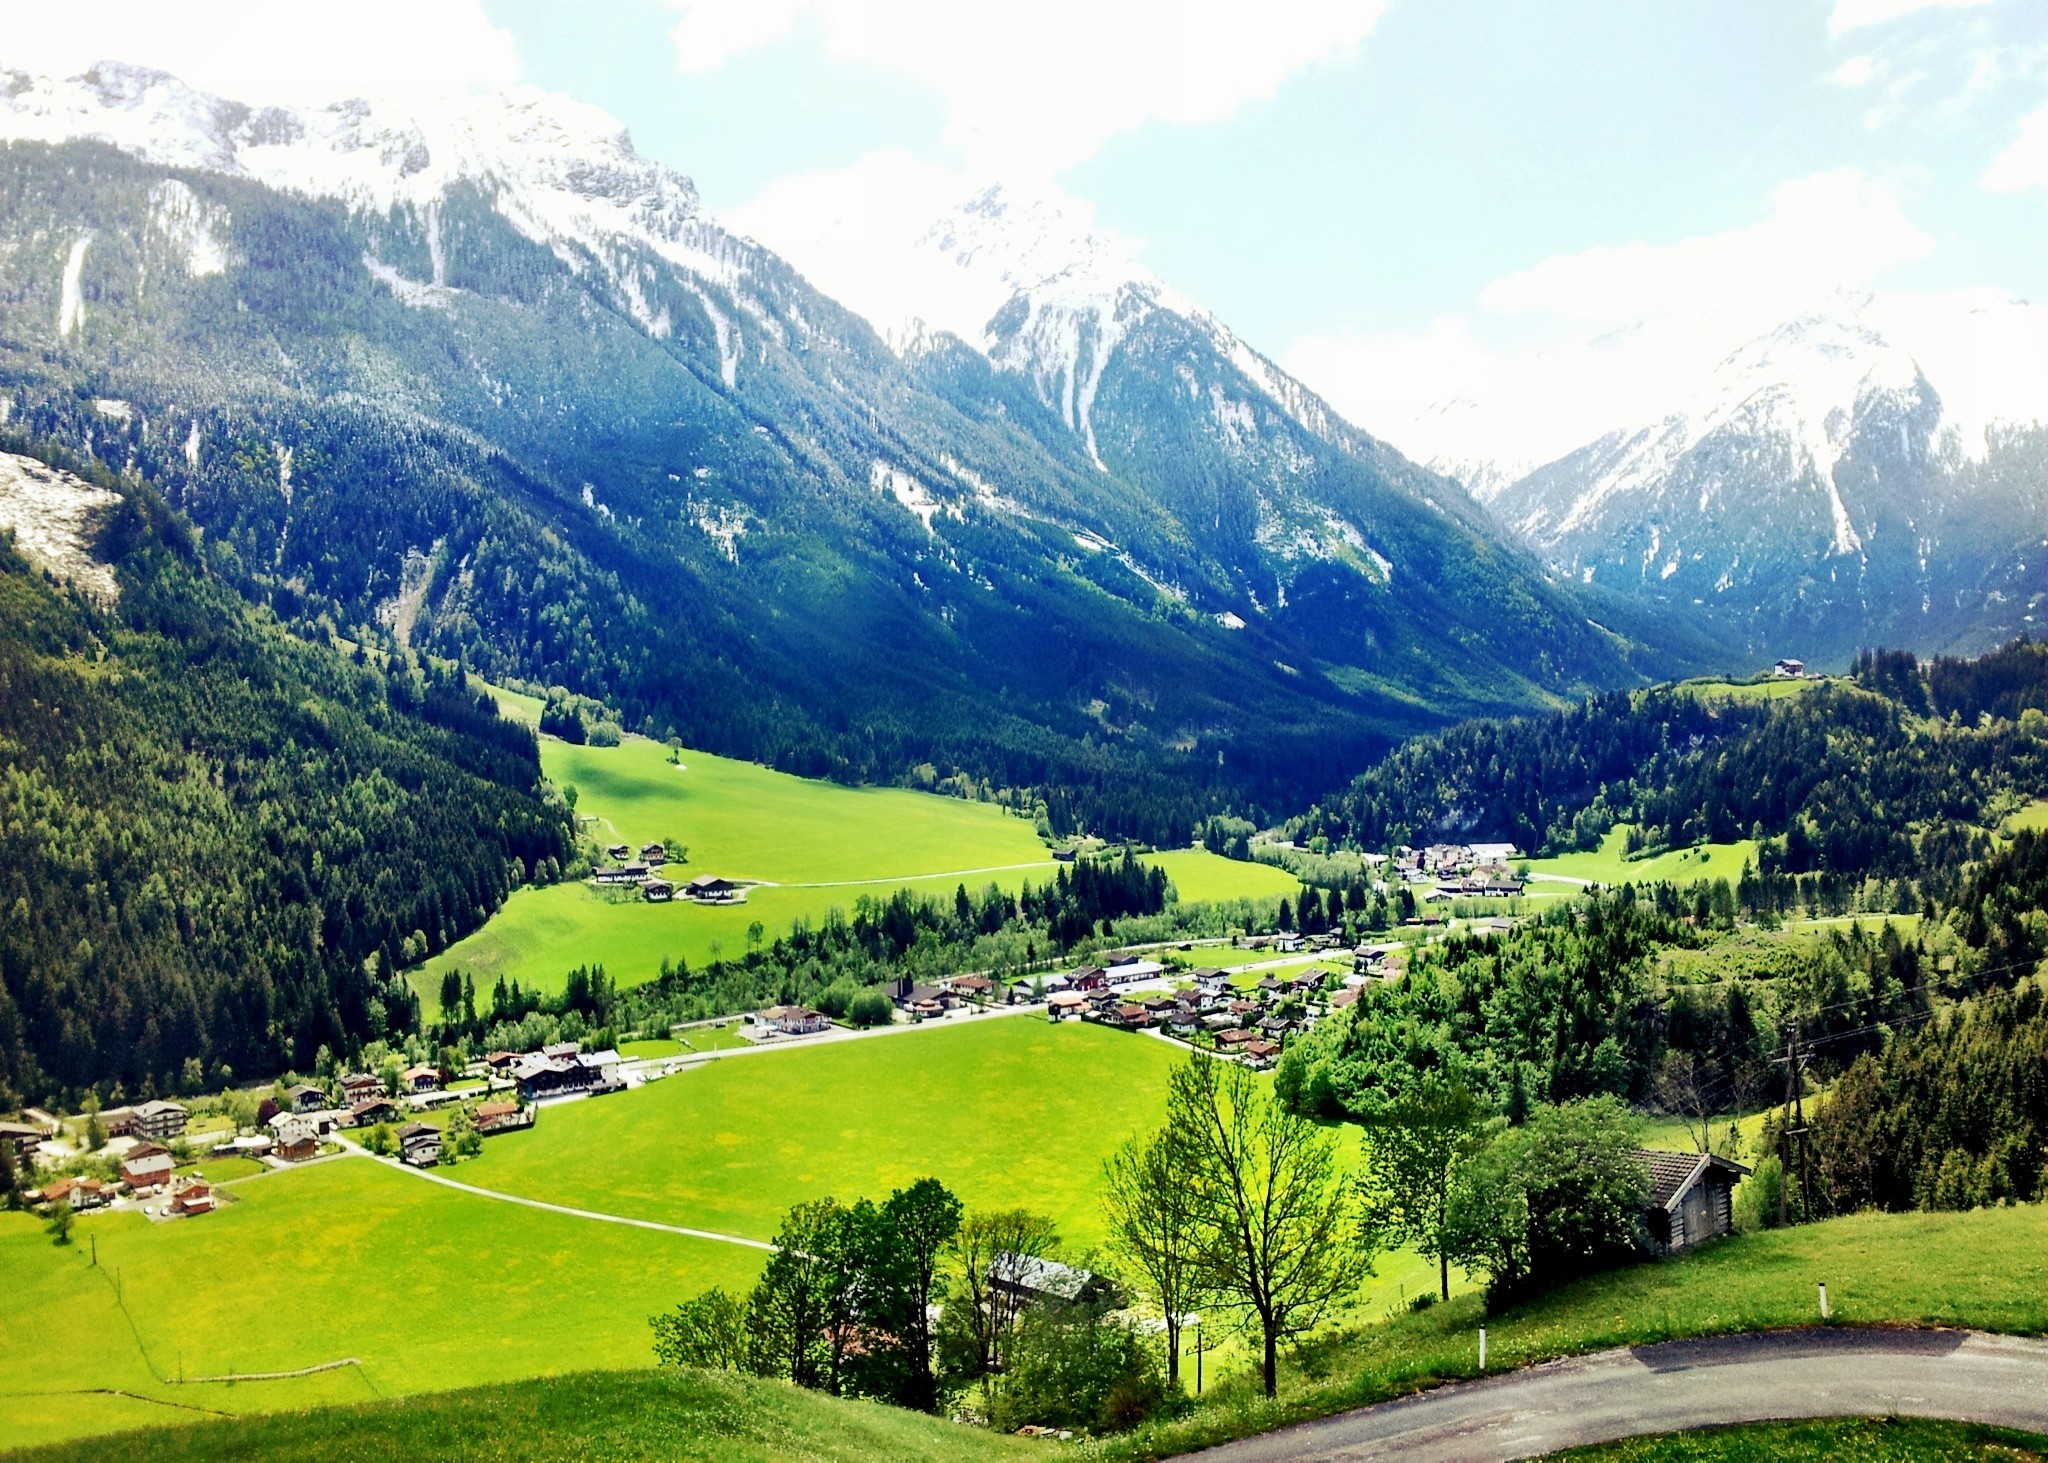 2048x1463 Alpine meadows in the resort of Zell am See, Austria